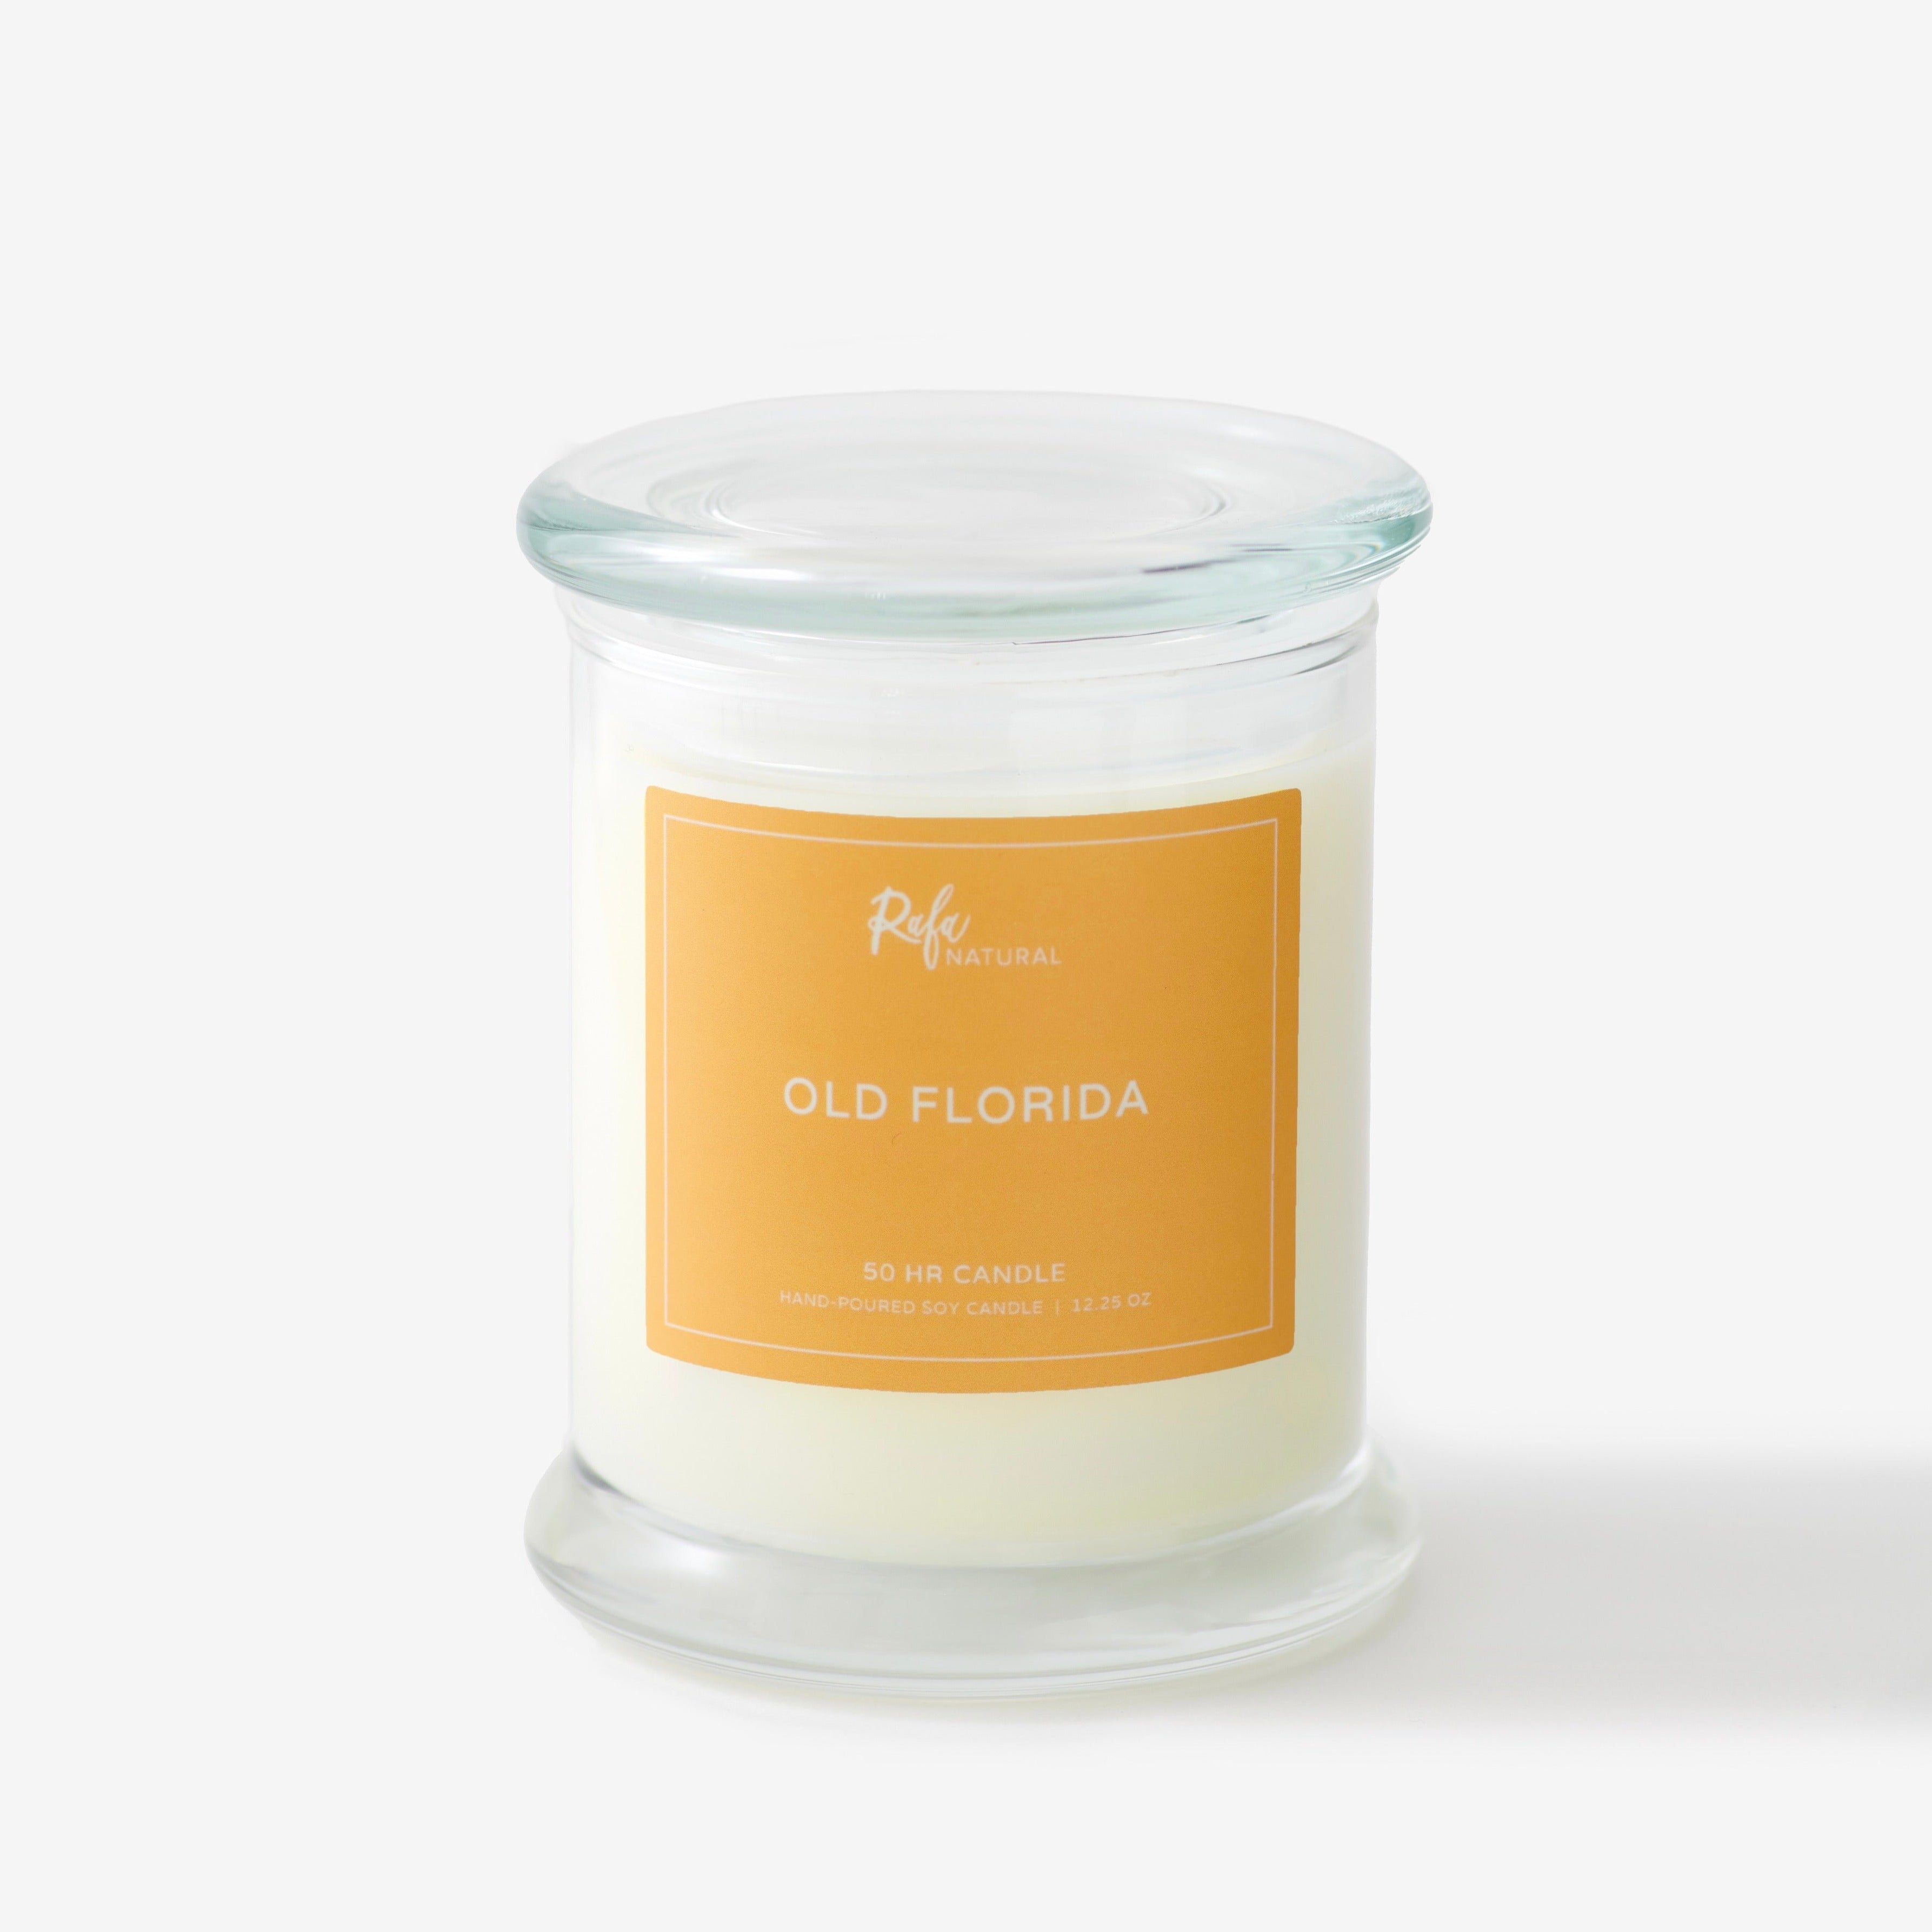 Old Florida 50Hr Candle by Rafa Natural 